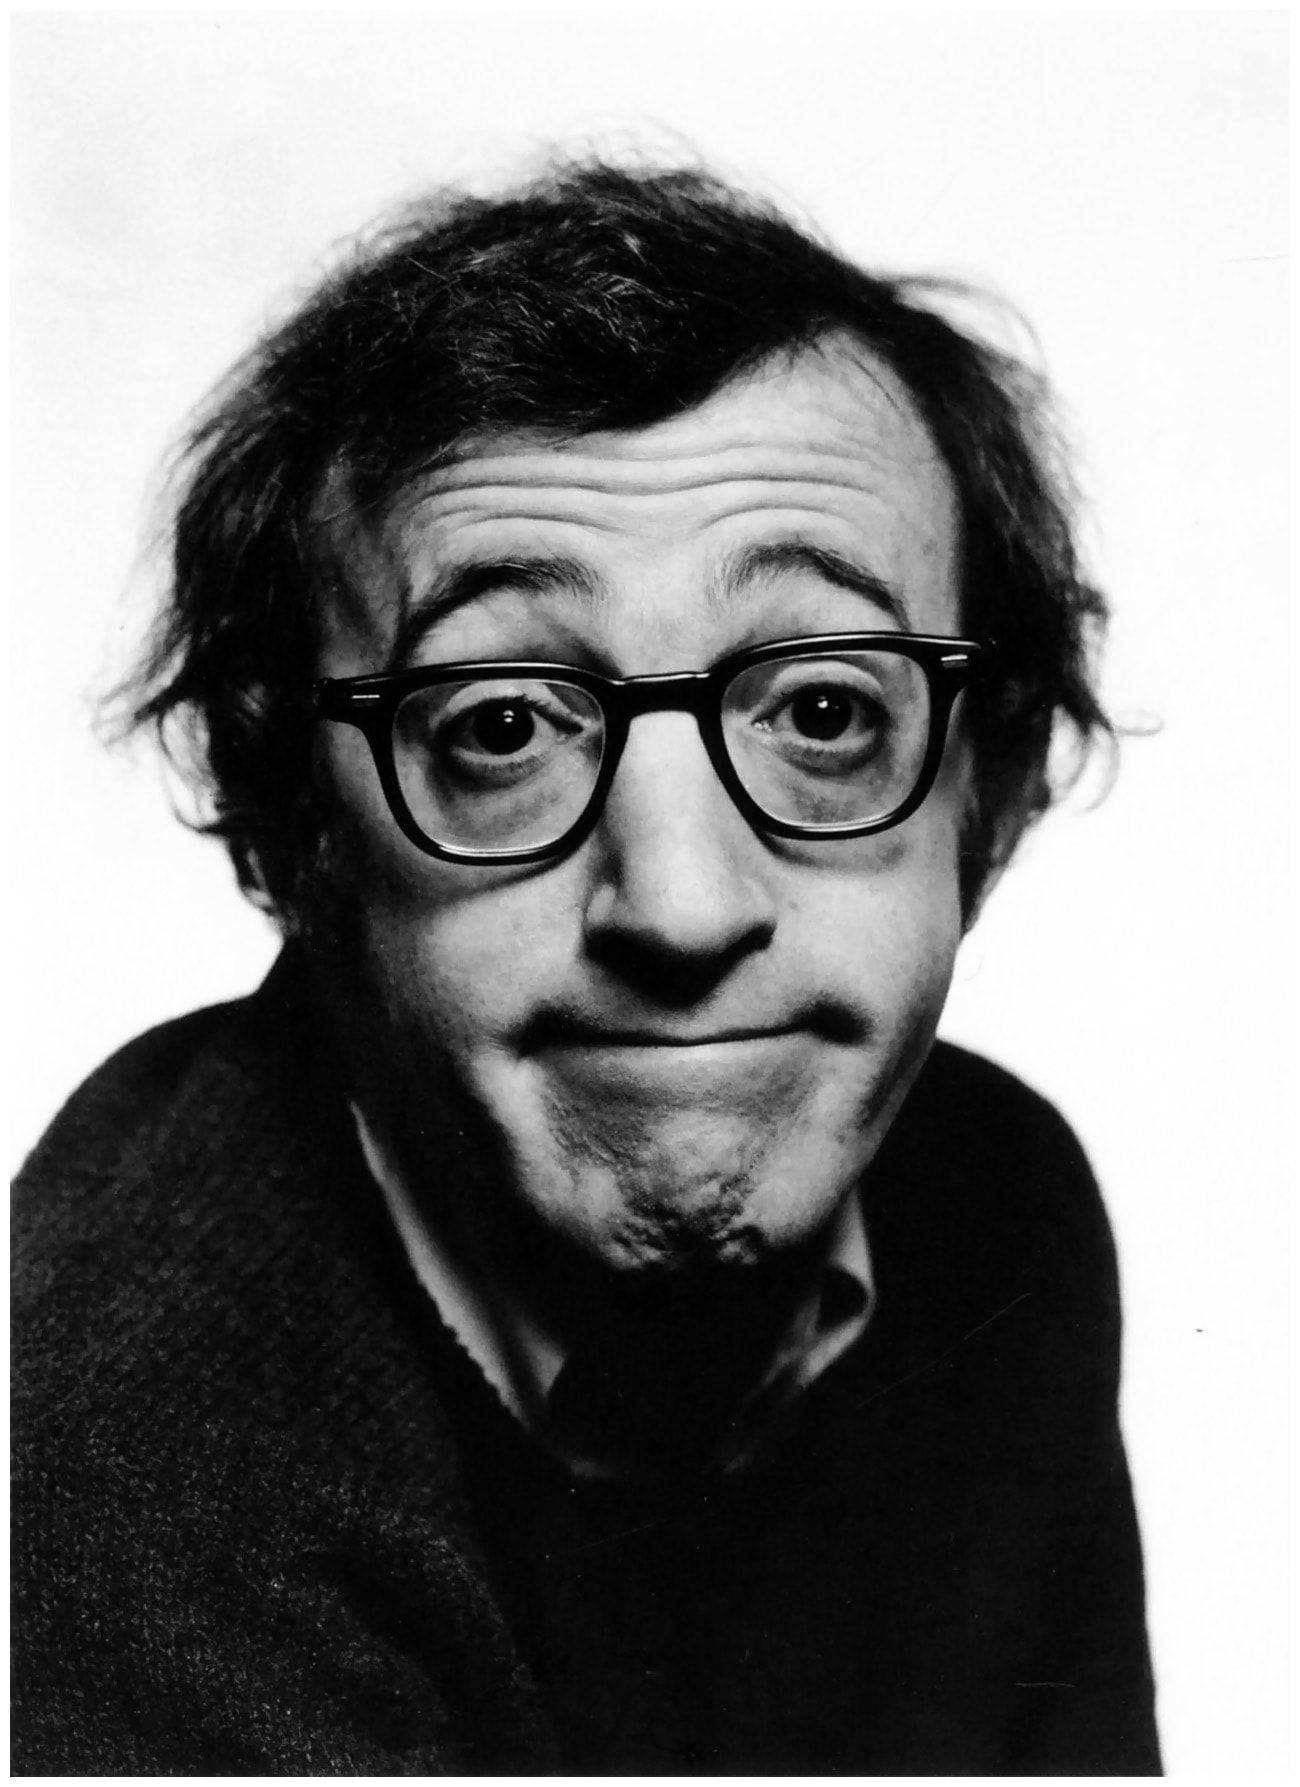 Young Woody Allen posed in a 1969 black and white photograph Wallpaper